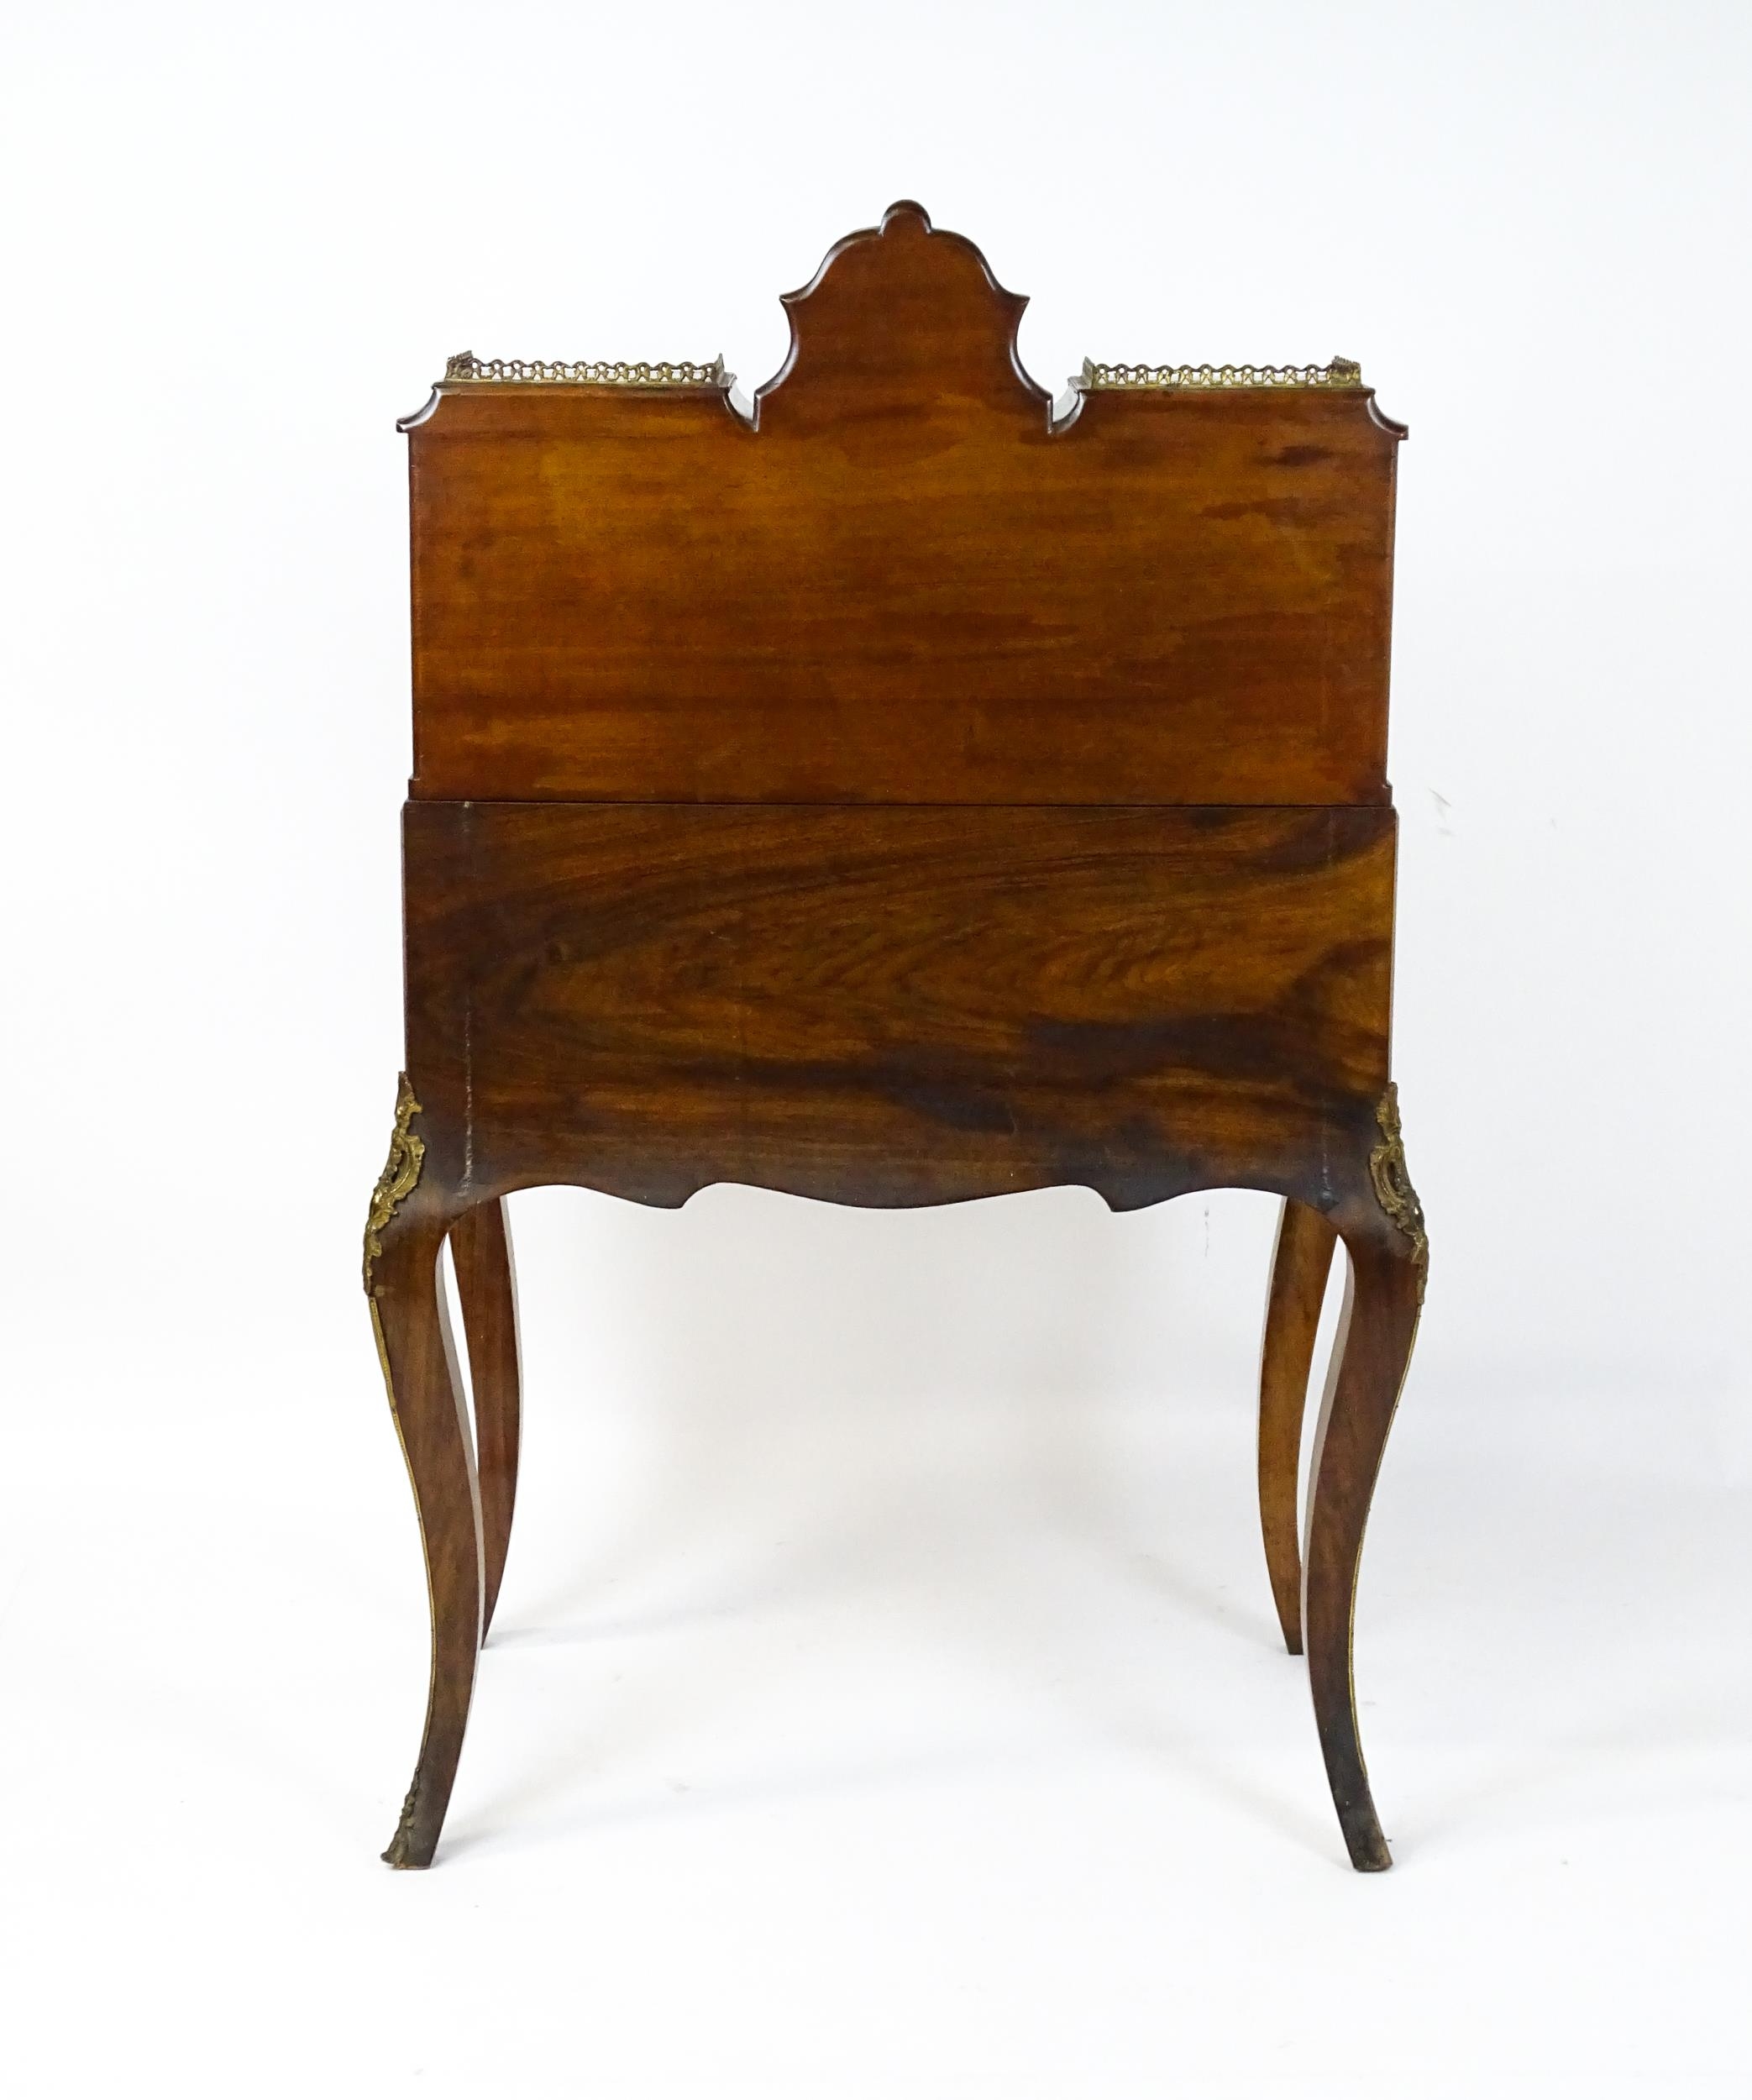 A 19thC burr walnut Bonheur du jour with a mirrored back stand and flanked by two glazed cabinets - Image 11 of 11